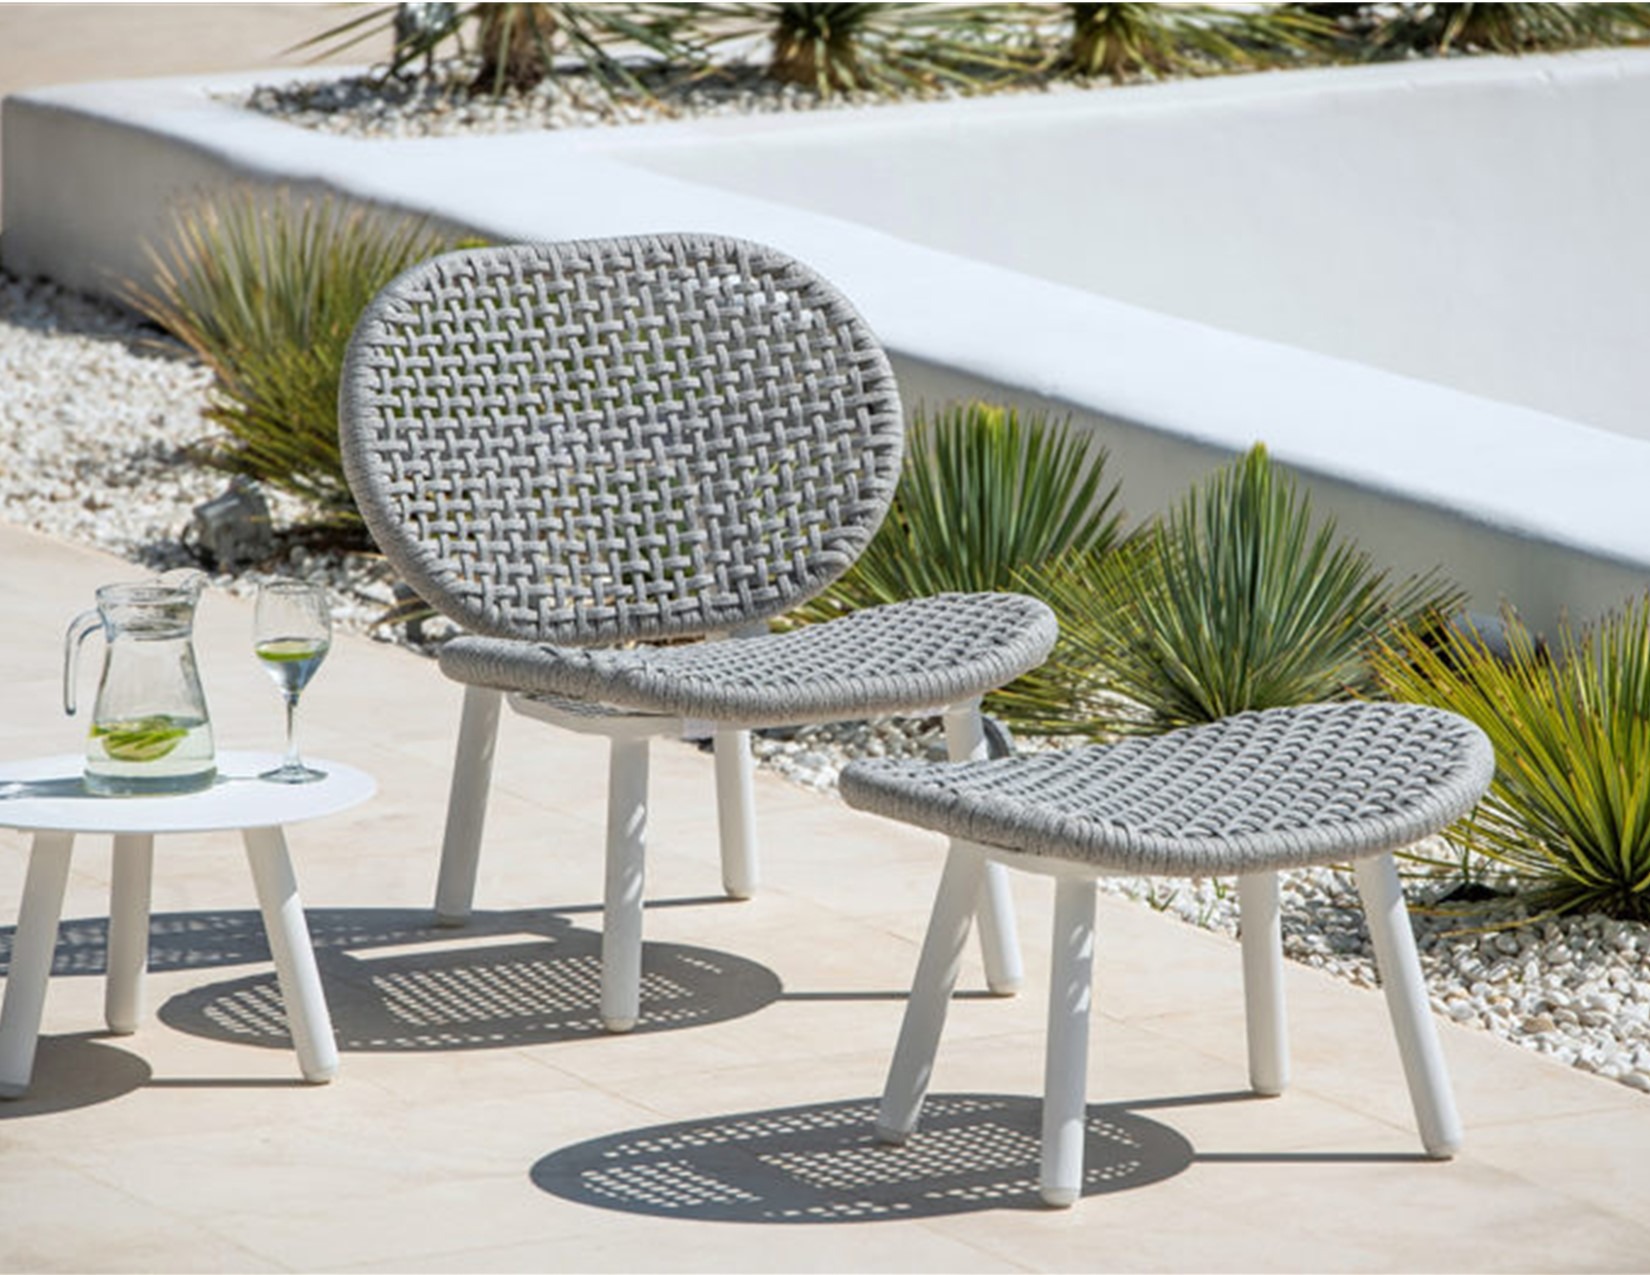 https://www.coutureoutdoor.com/wp-content/uploads/2020/05/abi-modern-rope-white-black-cushionless-no-cushion-weave-outdoor-design-latest-2020-sofa-seat-hotel-hospitality-contract-home-palm-beach-miami-california.jpg